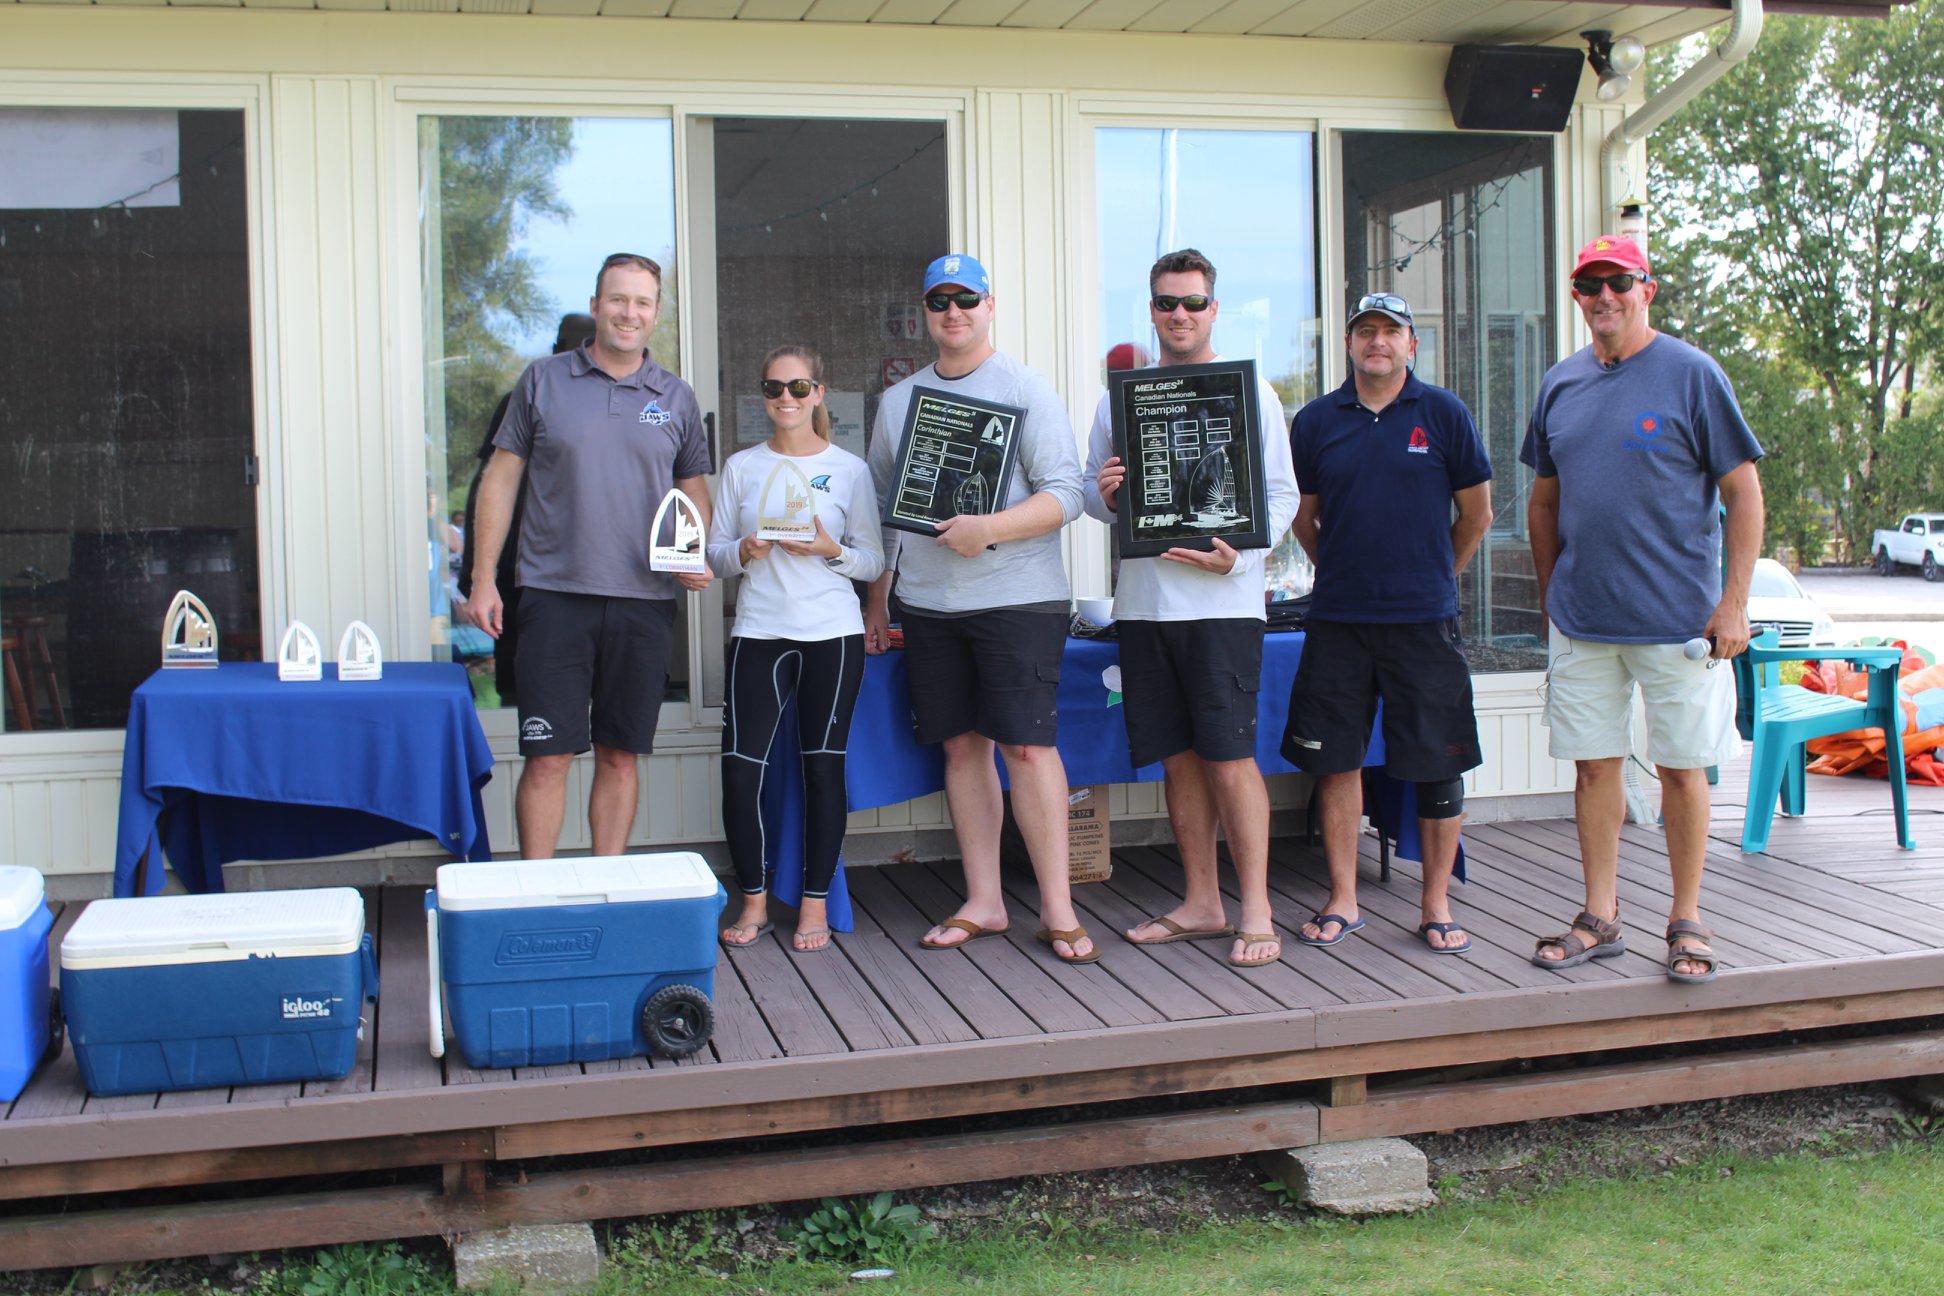 2019 Melges 24 Canadian National Champions